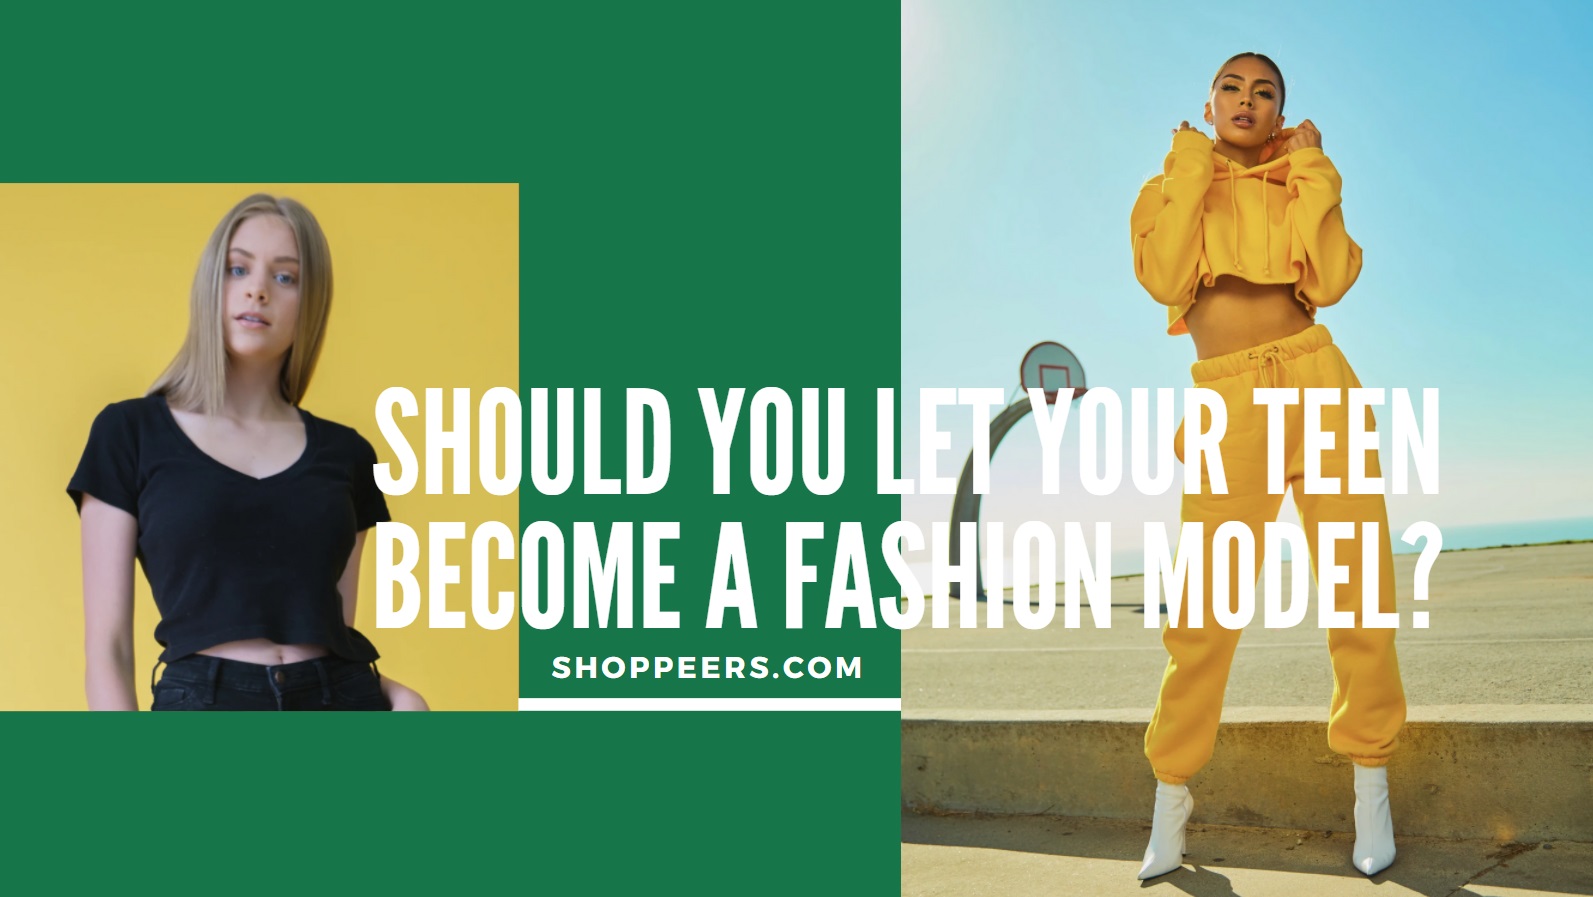 Should You Let Your Teen Become a Fashion Model? - Shoppeers